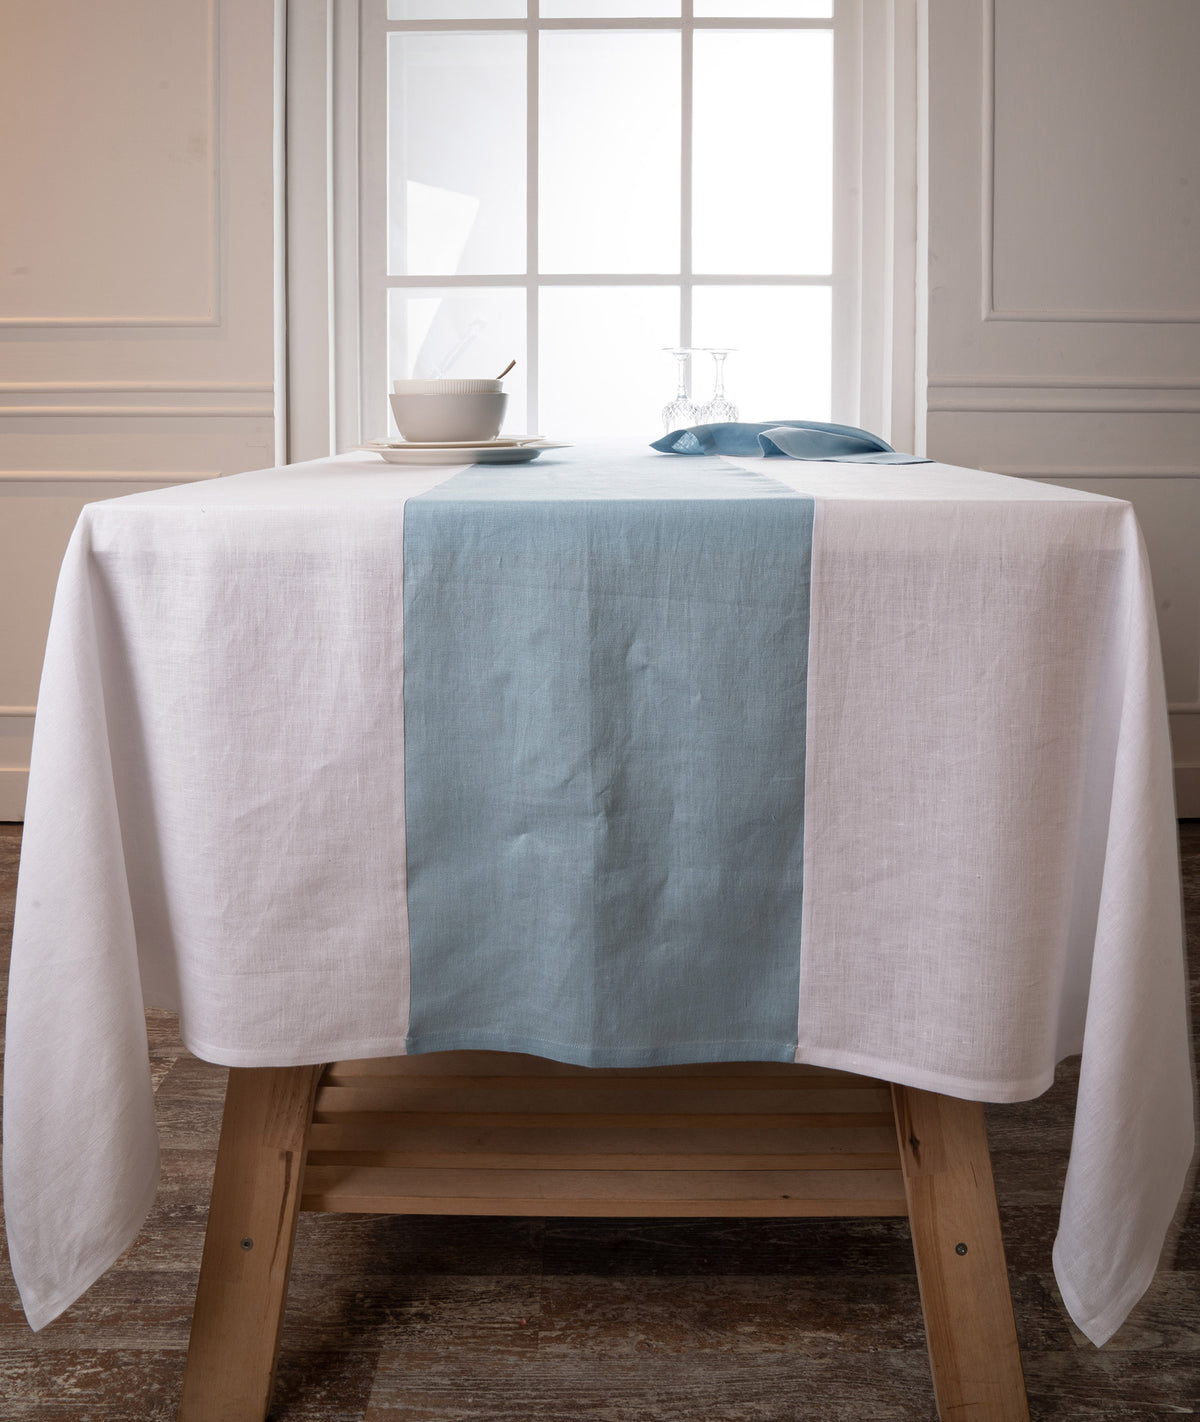 White and Powder Blue Linen Tablecloth - Splicing